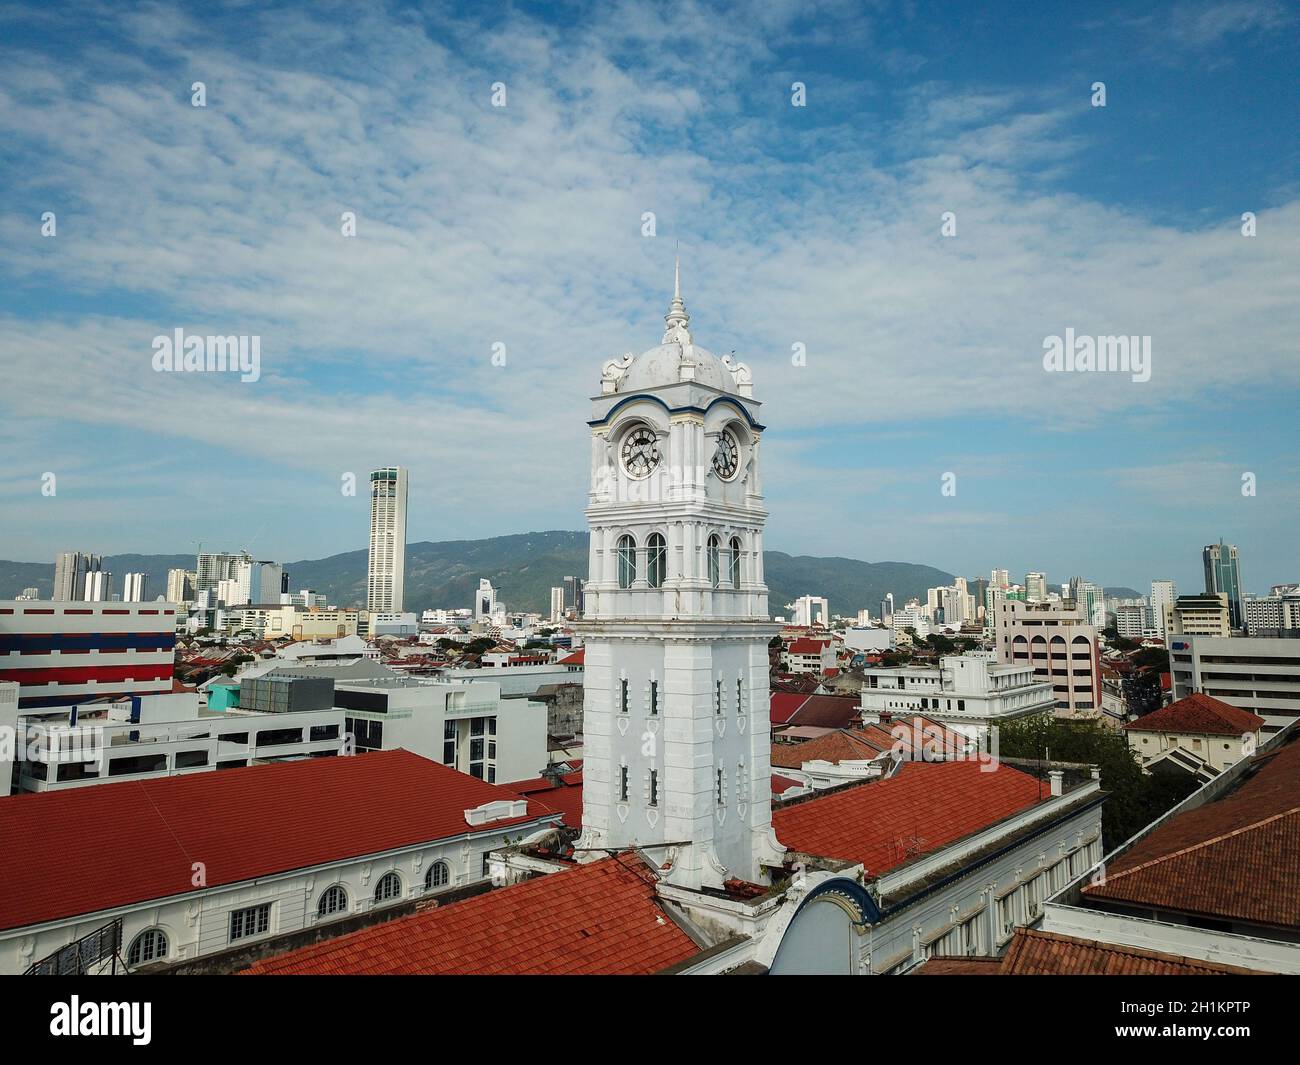 Georgetown, Penang/Malaysia - Feb 28 2020: Clock Tower at Malayan Railway Building with background KOMTAR tower. Stock Photo